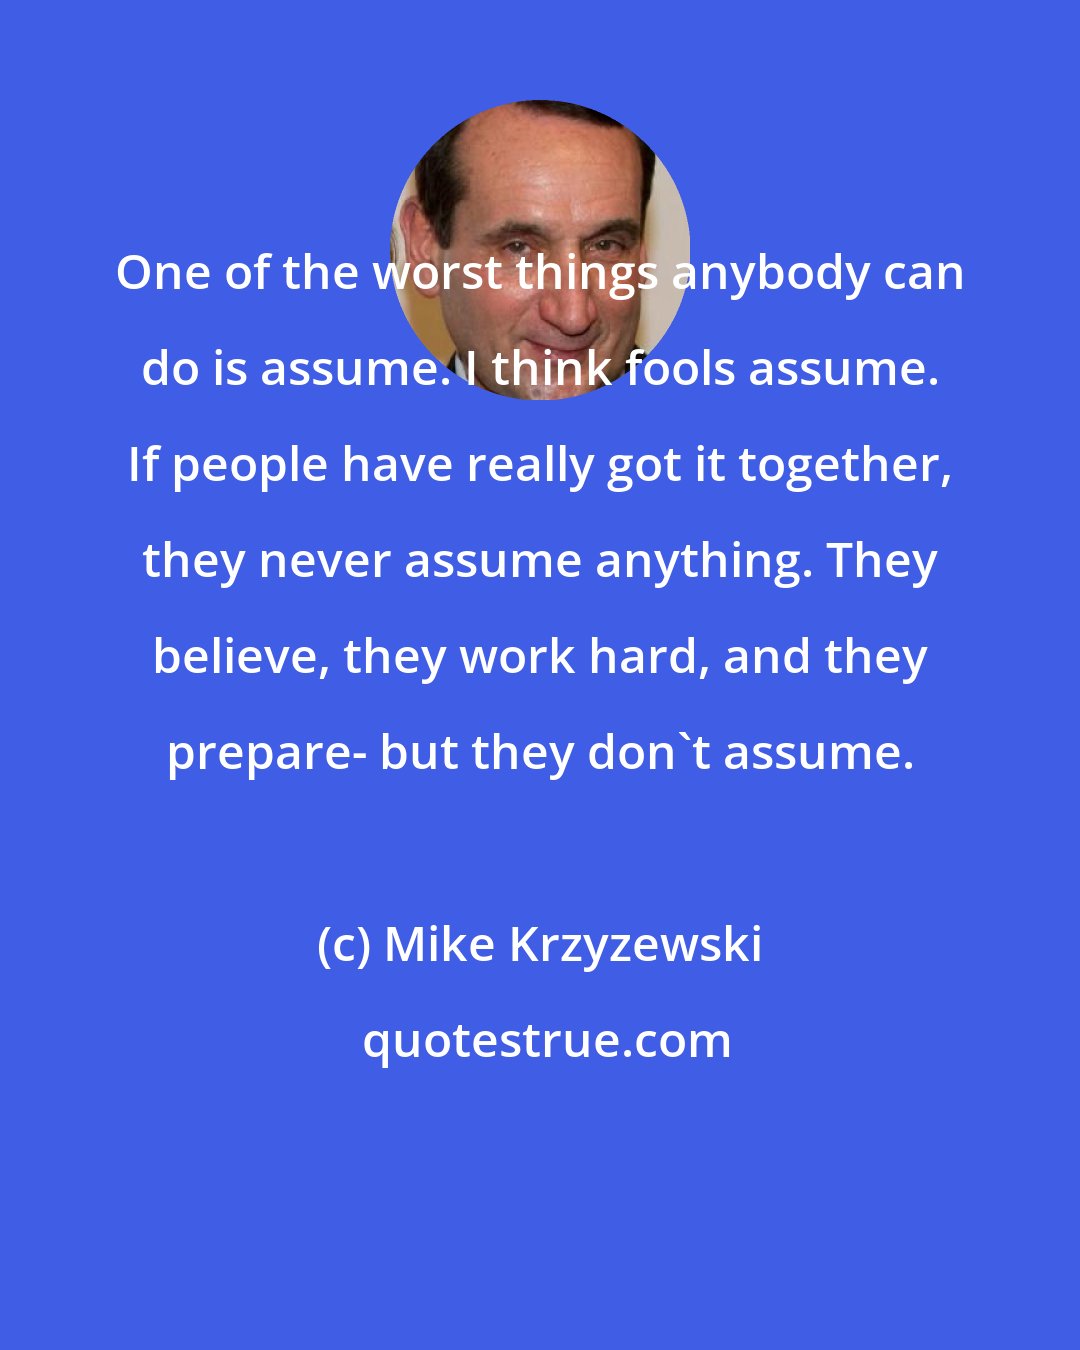 Mike Krzyzewski: One of the worst things anybody can do is assume. I think fools assume. If people have really got it together, they never assume anything. They believe, they work hard, and they prepare- but they don't assume.